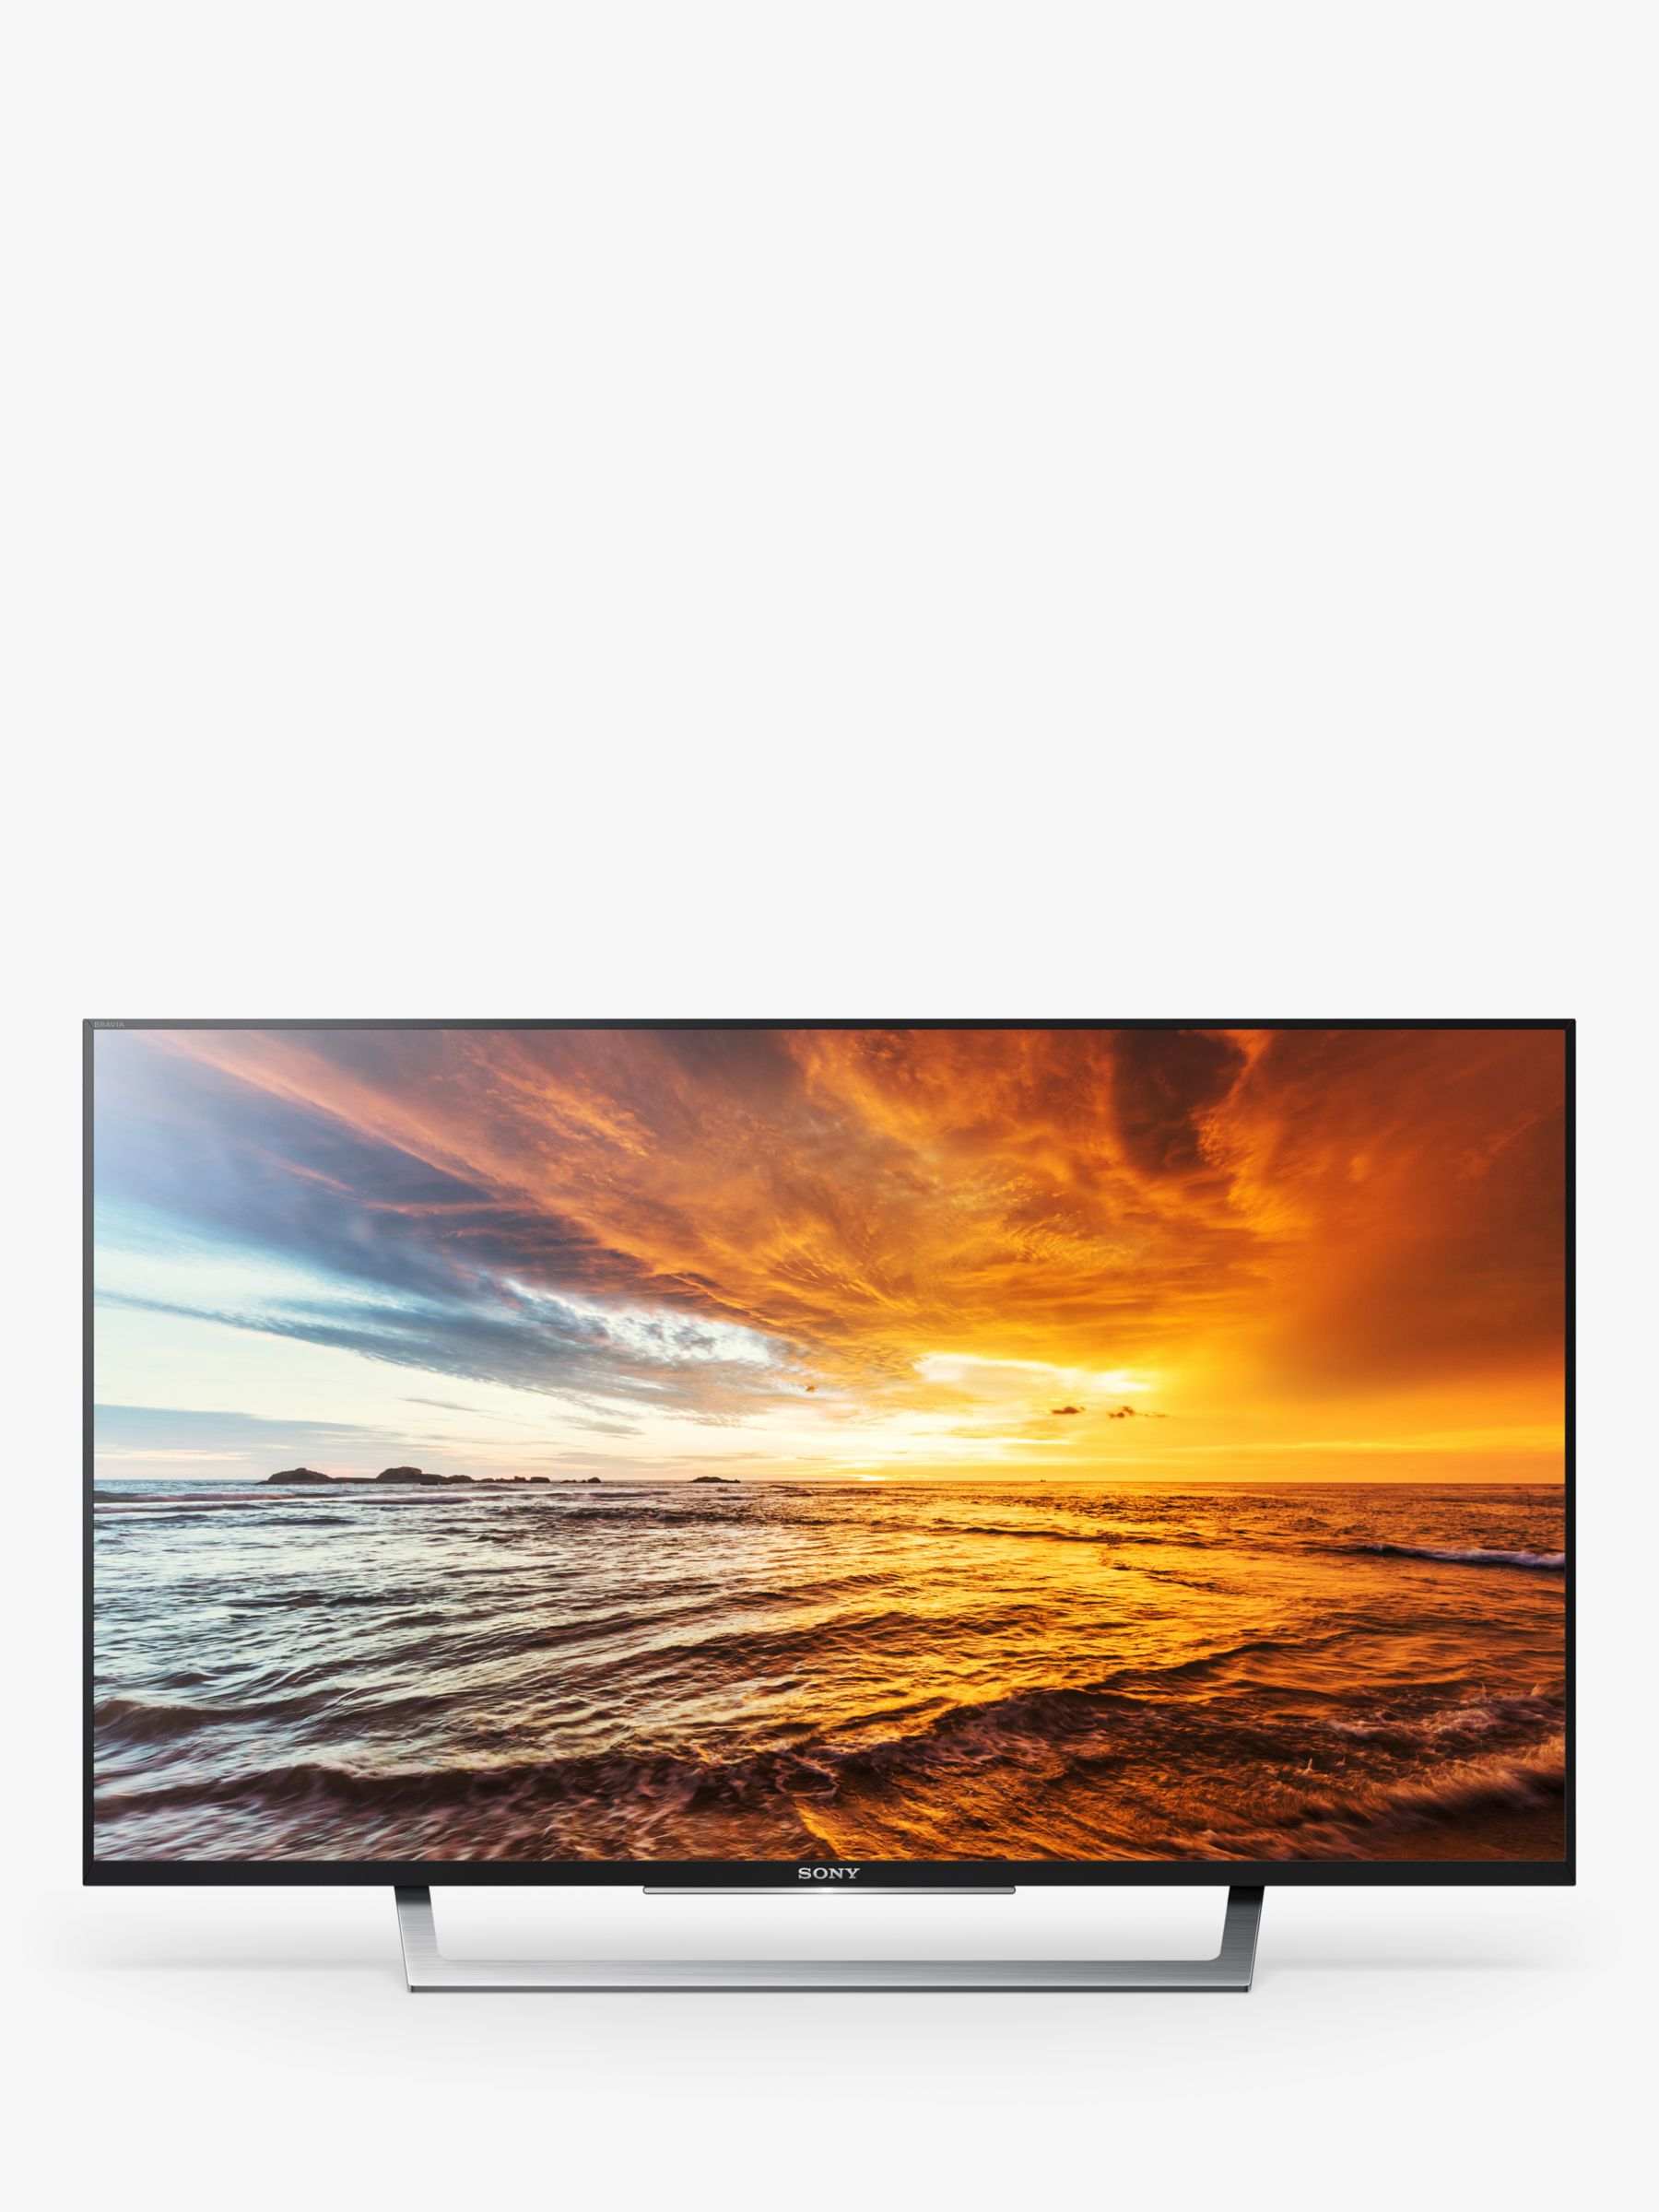 Sony Bravia 32WD756BU LED HD 1080p Smart TV, 32 with Freeview HD & Cable Management System